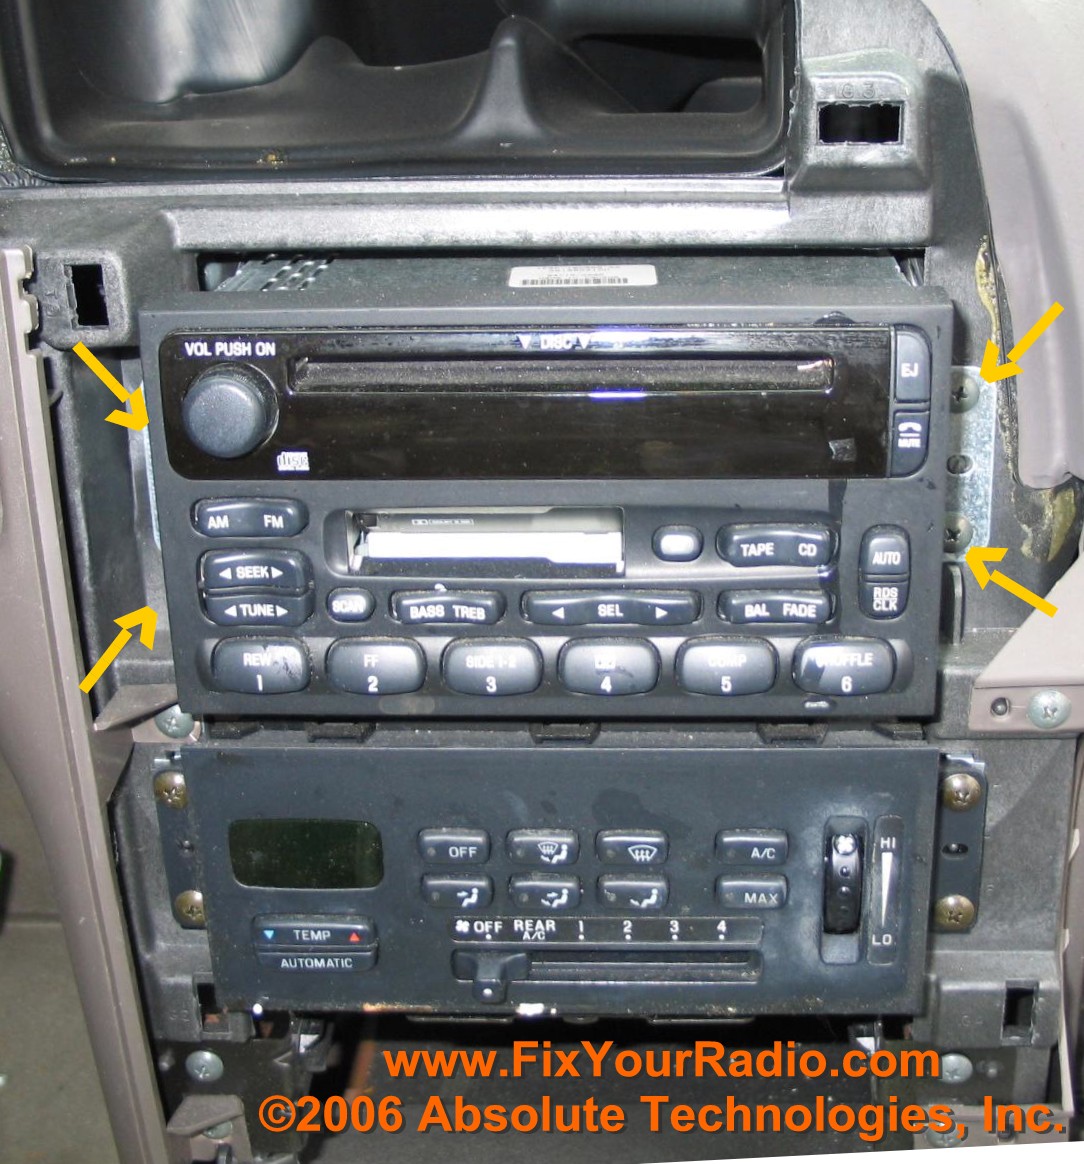 2000 Ford windstar stereo removal #2